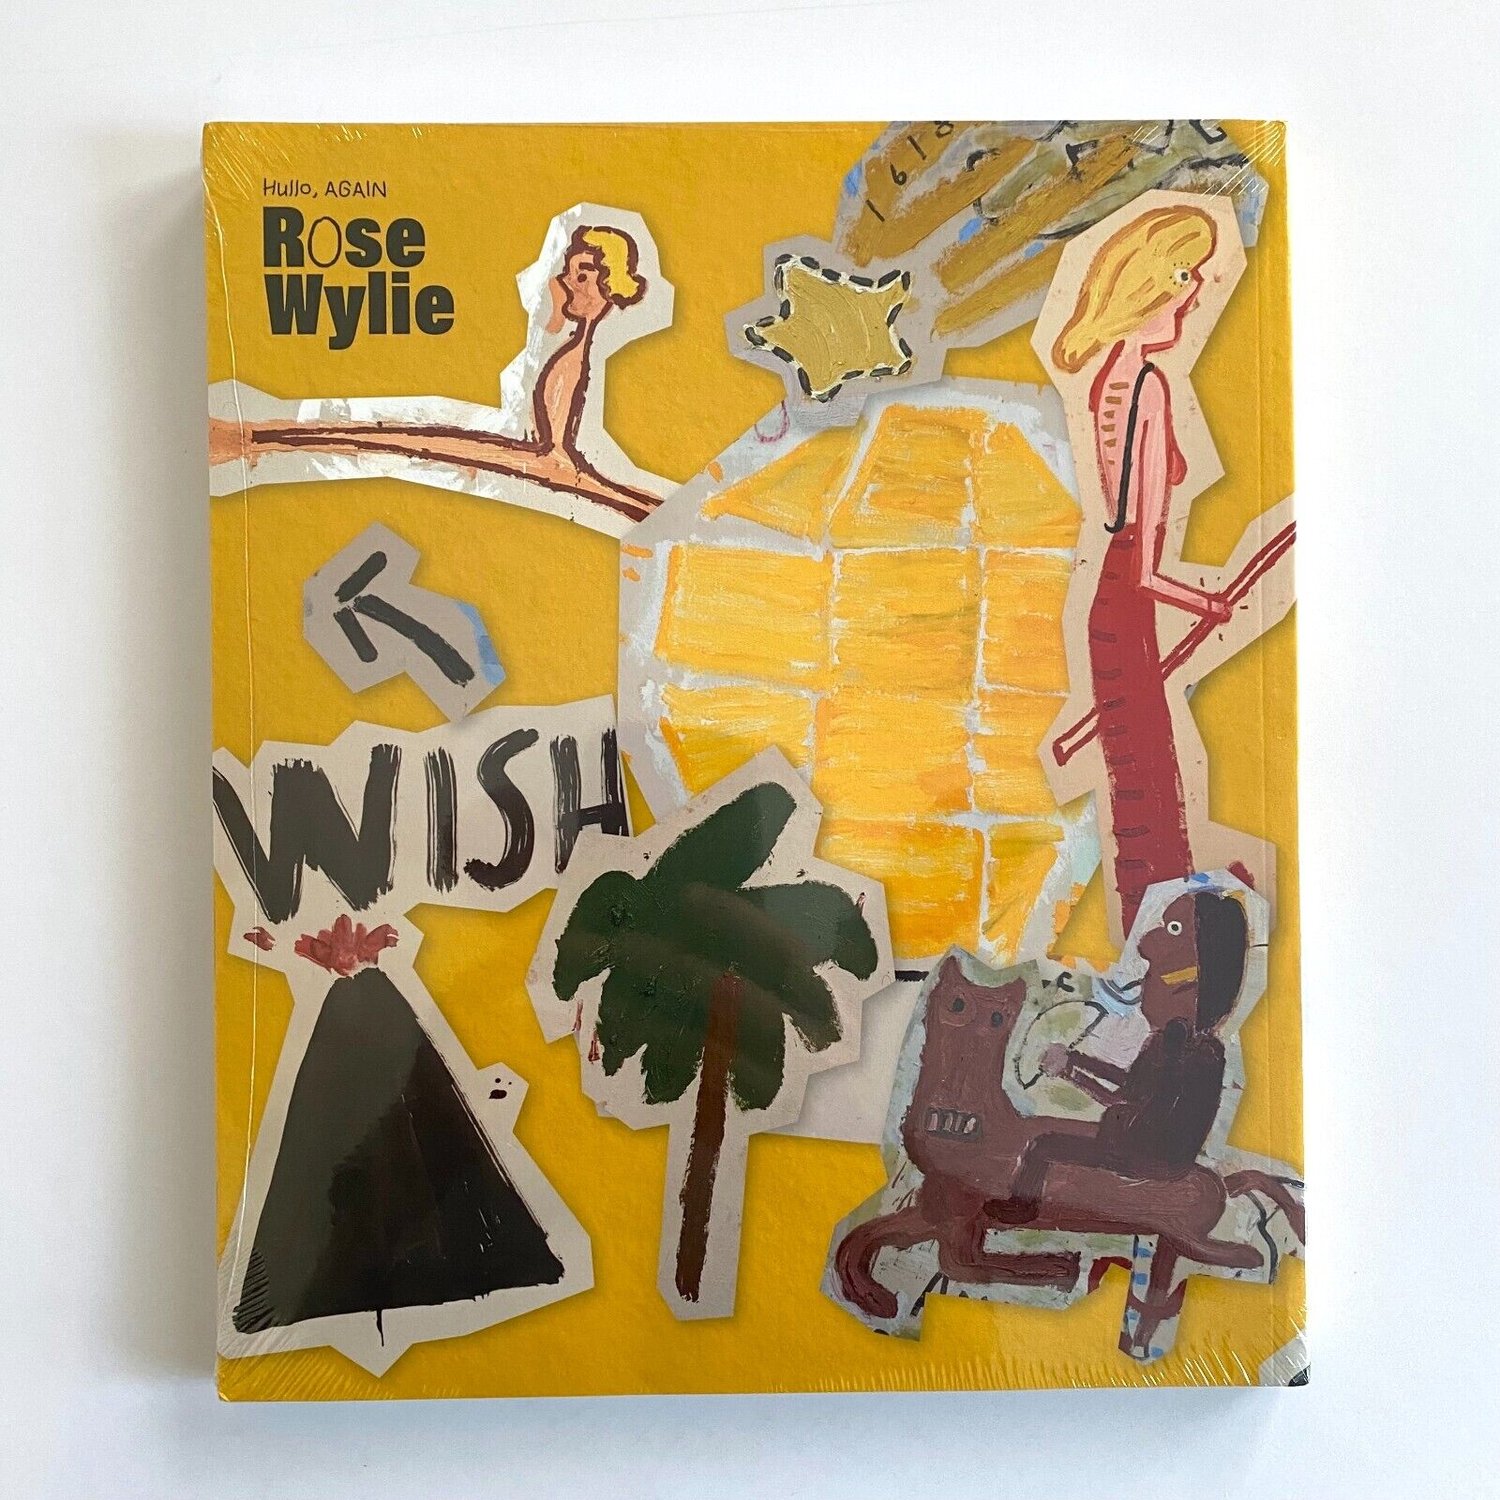 Image of Rose Wylie: Hullo AGAIN, Exhibition Catalog